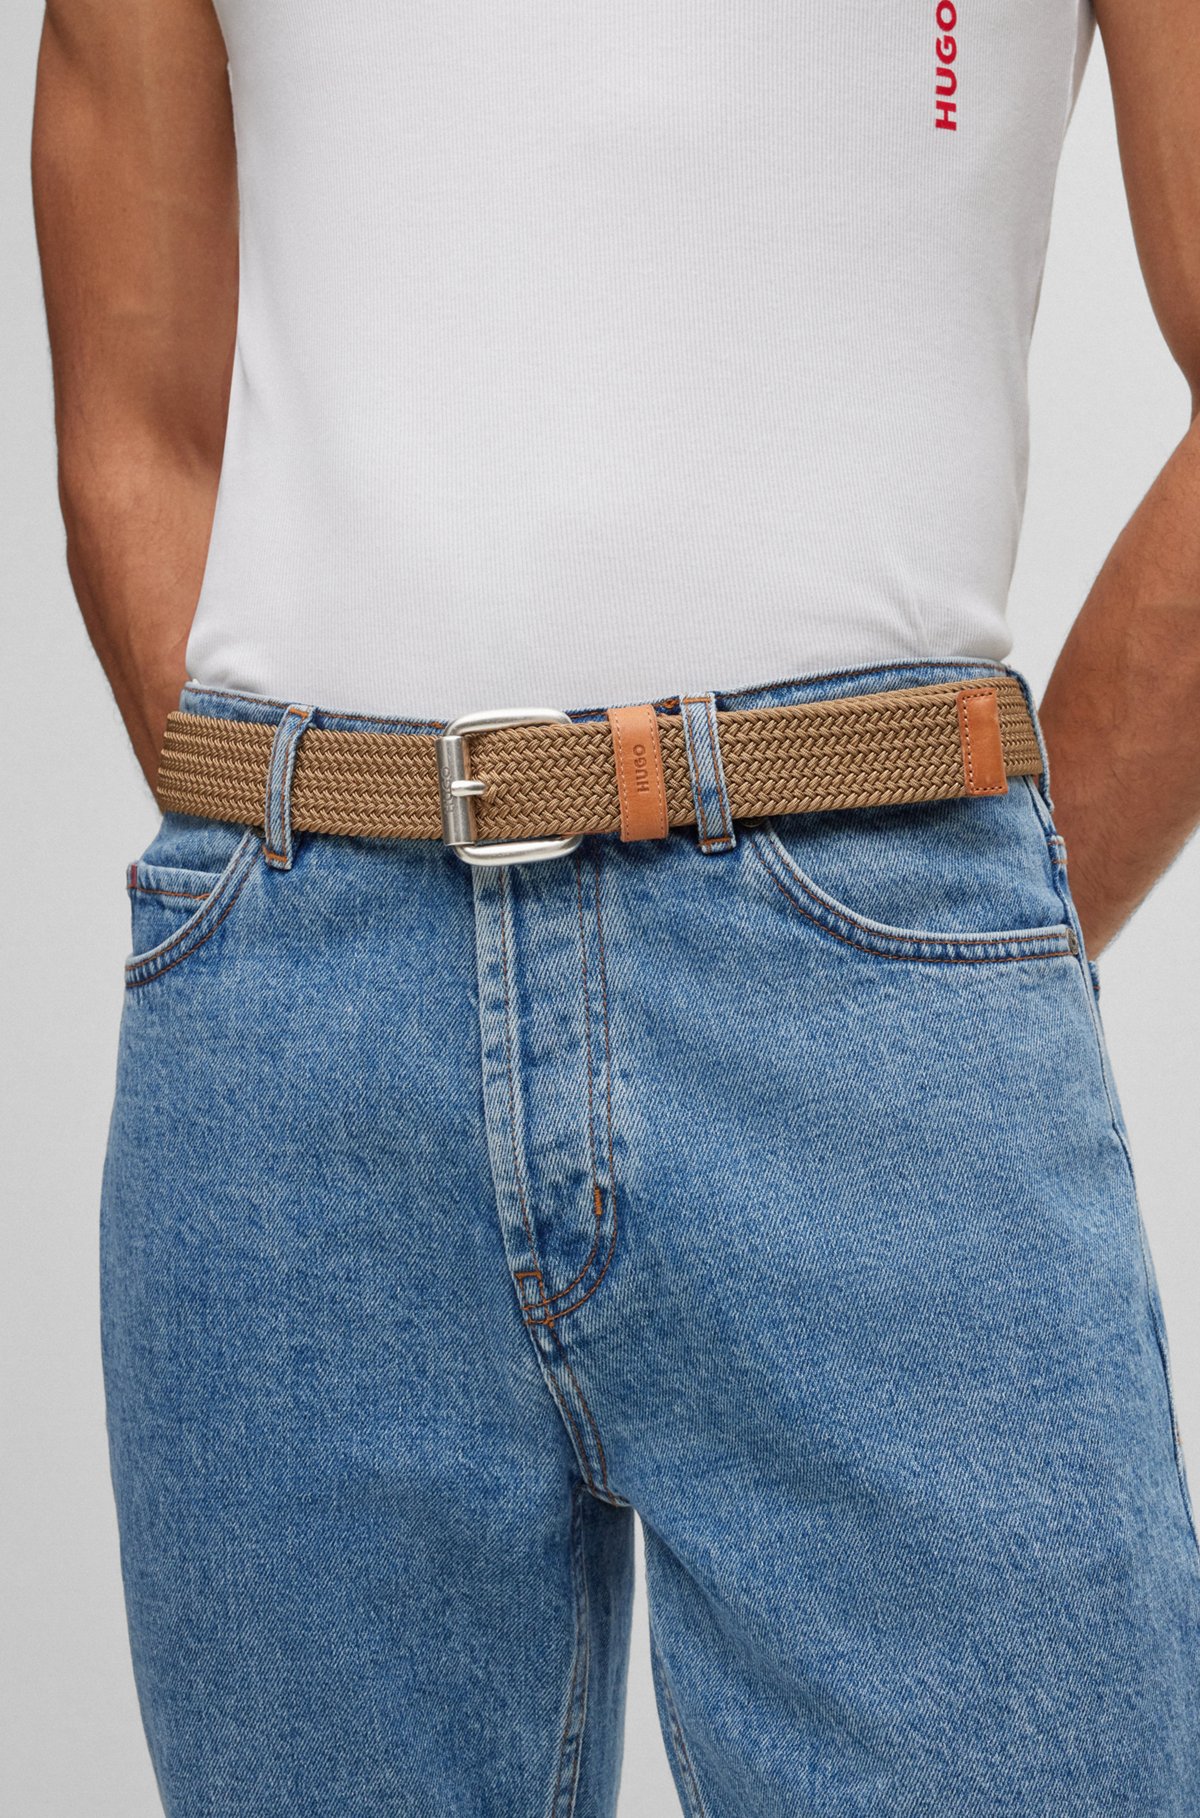 Italian-made woven belt with leather trims, Beige